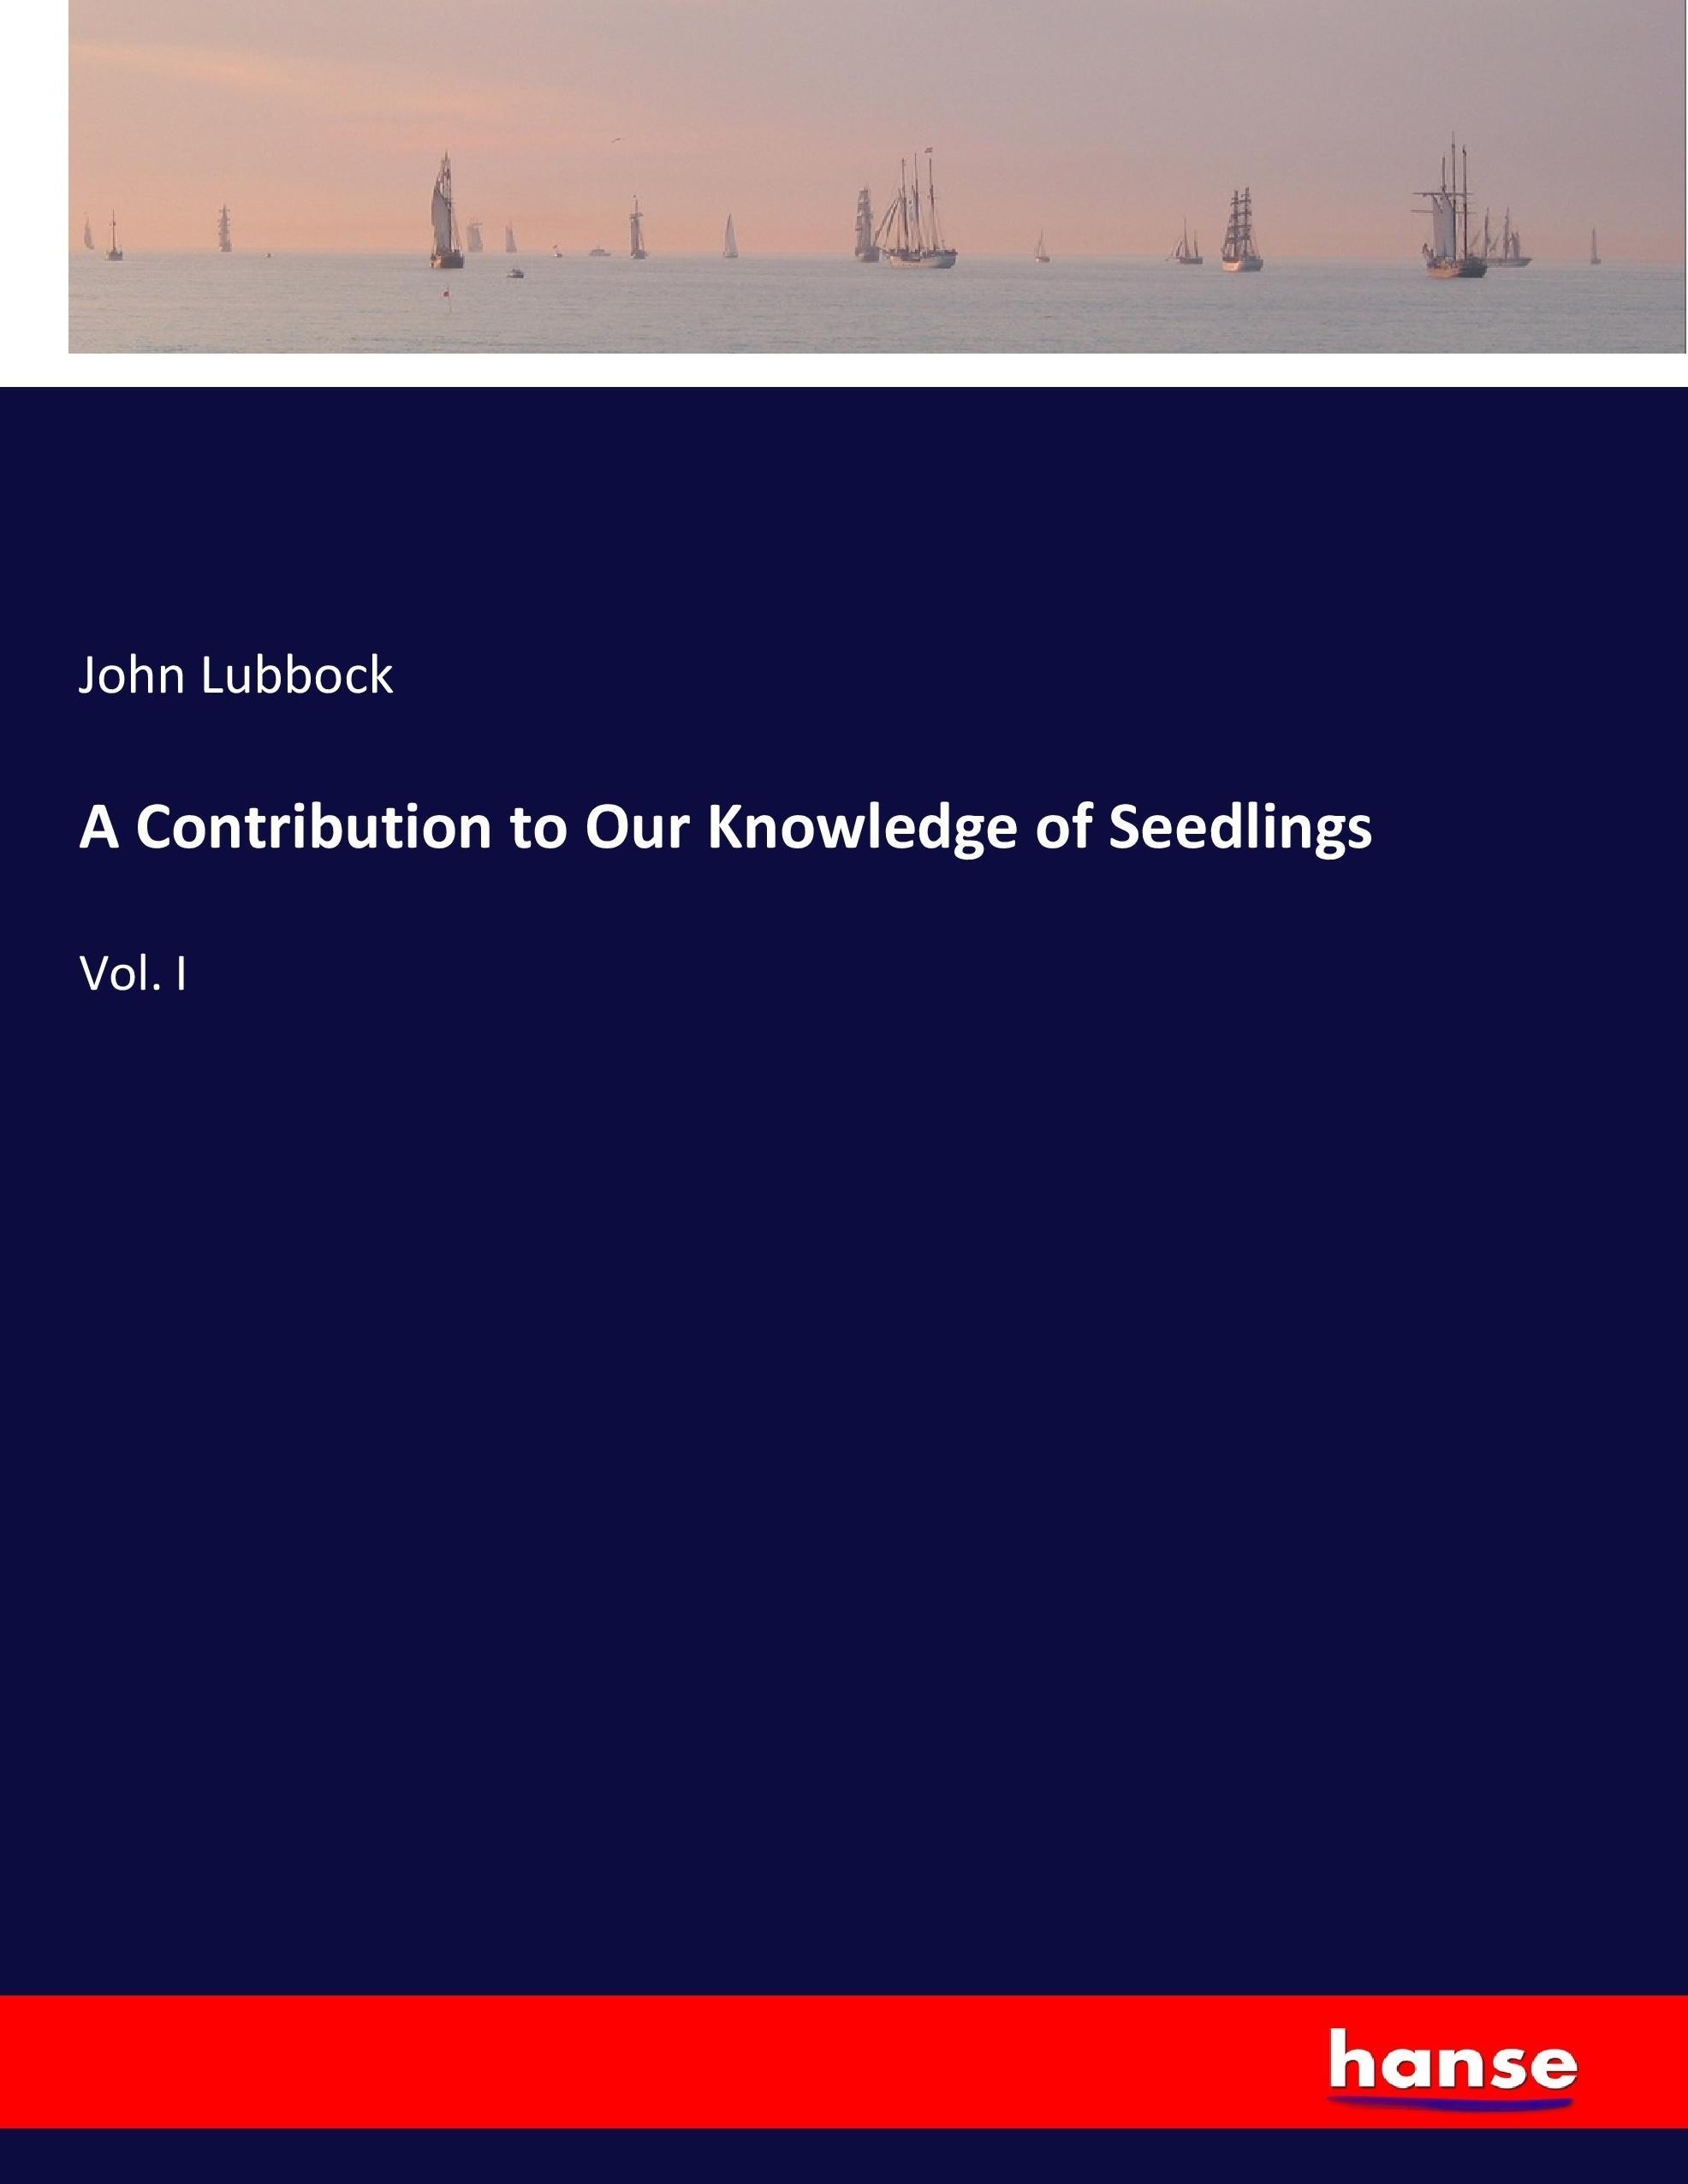 A Contribution to Our Knowledge of Seedlings - Lubbock, John